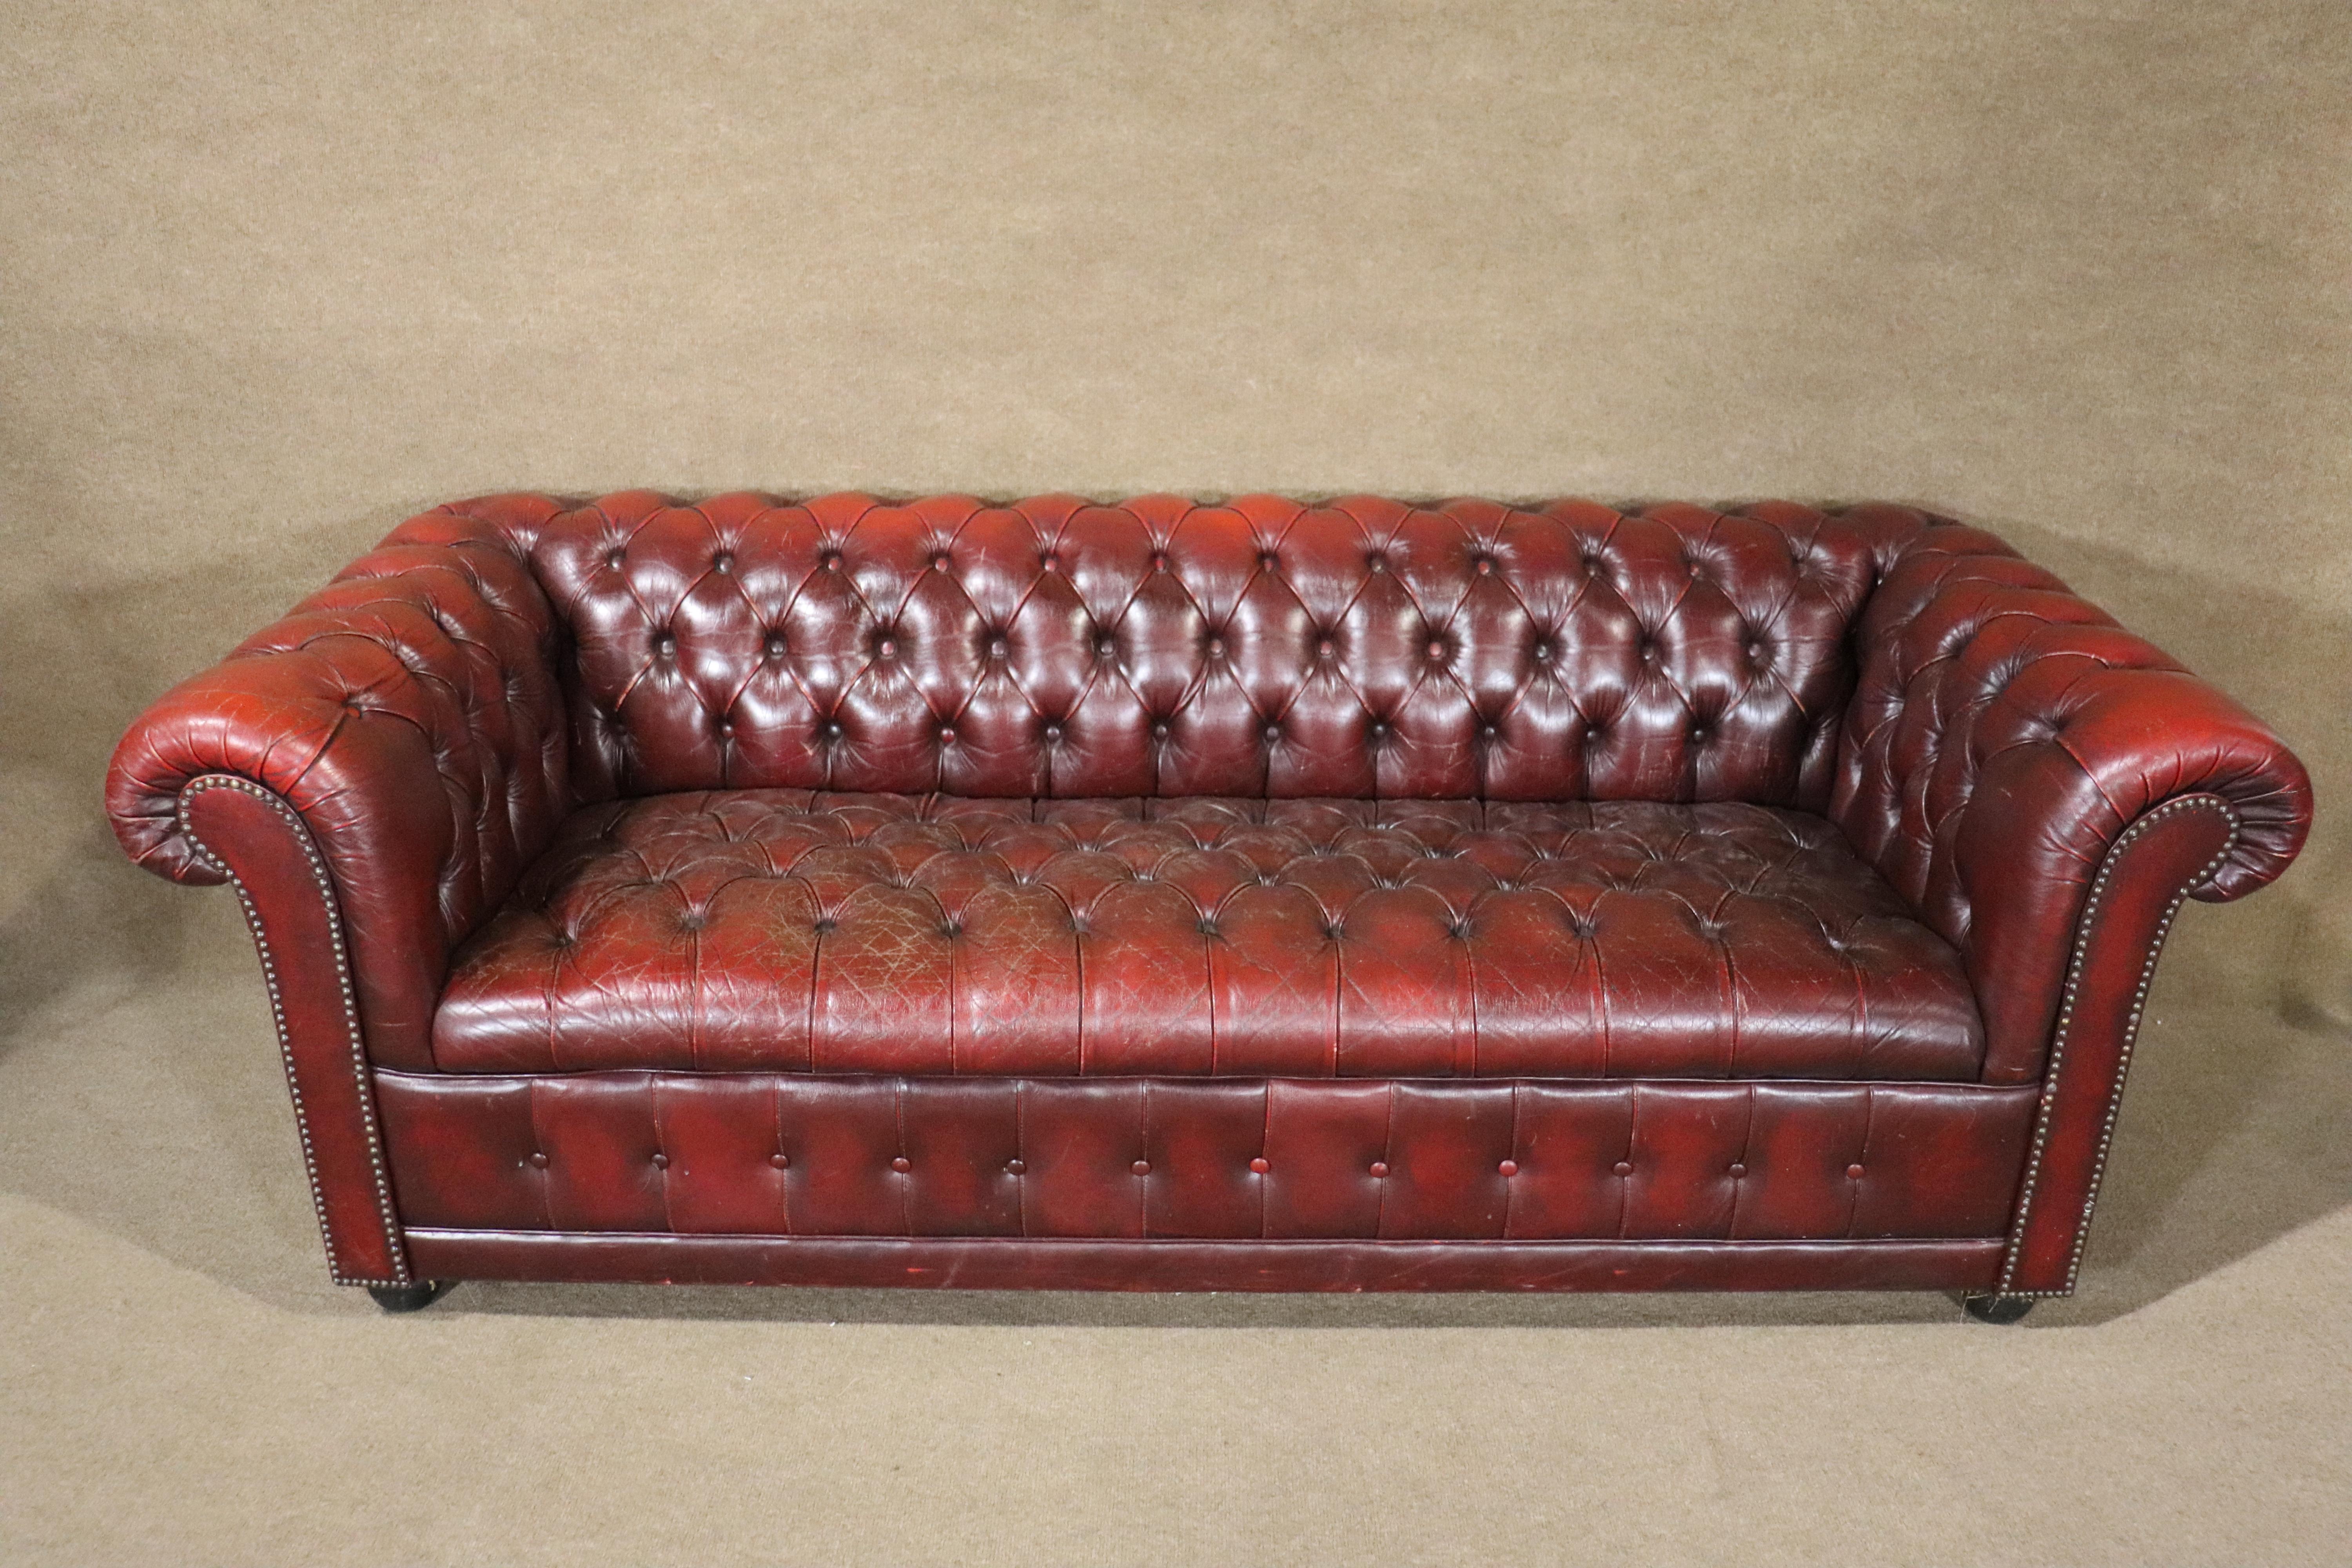 Long 6+ foot tufted sofa in deep burgundy leather. Great age and wear throughout.
Please confirm location NY or NJ